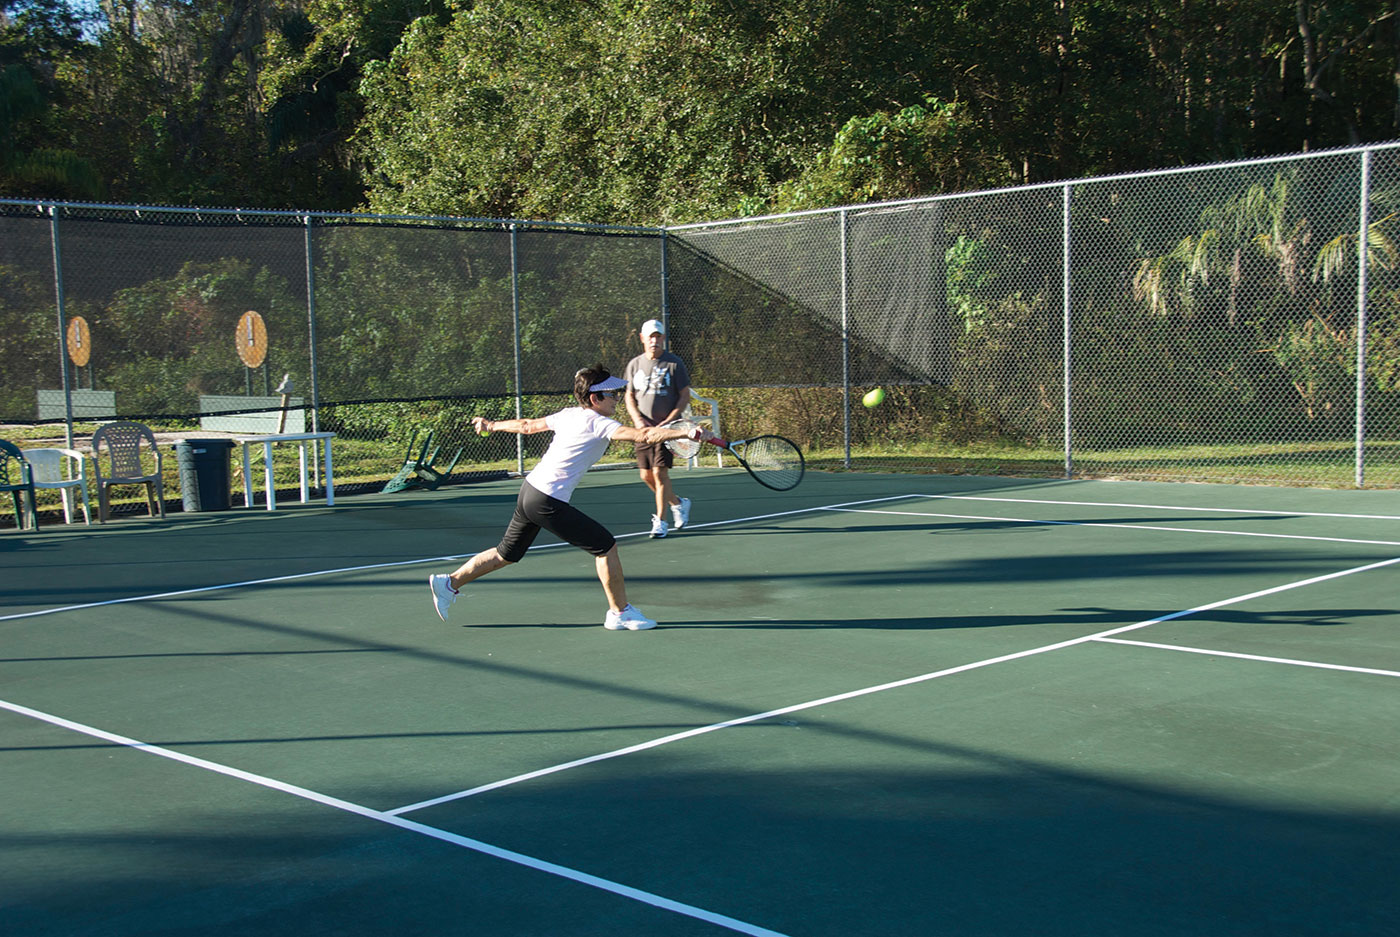 PHOTO: Nalcrest residents playing tennis.